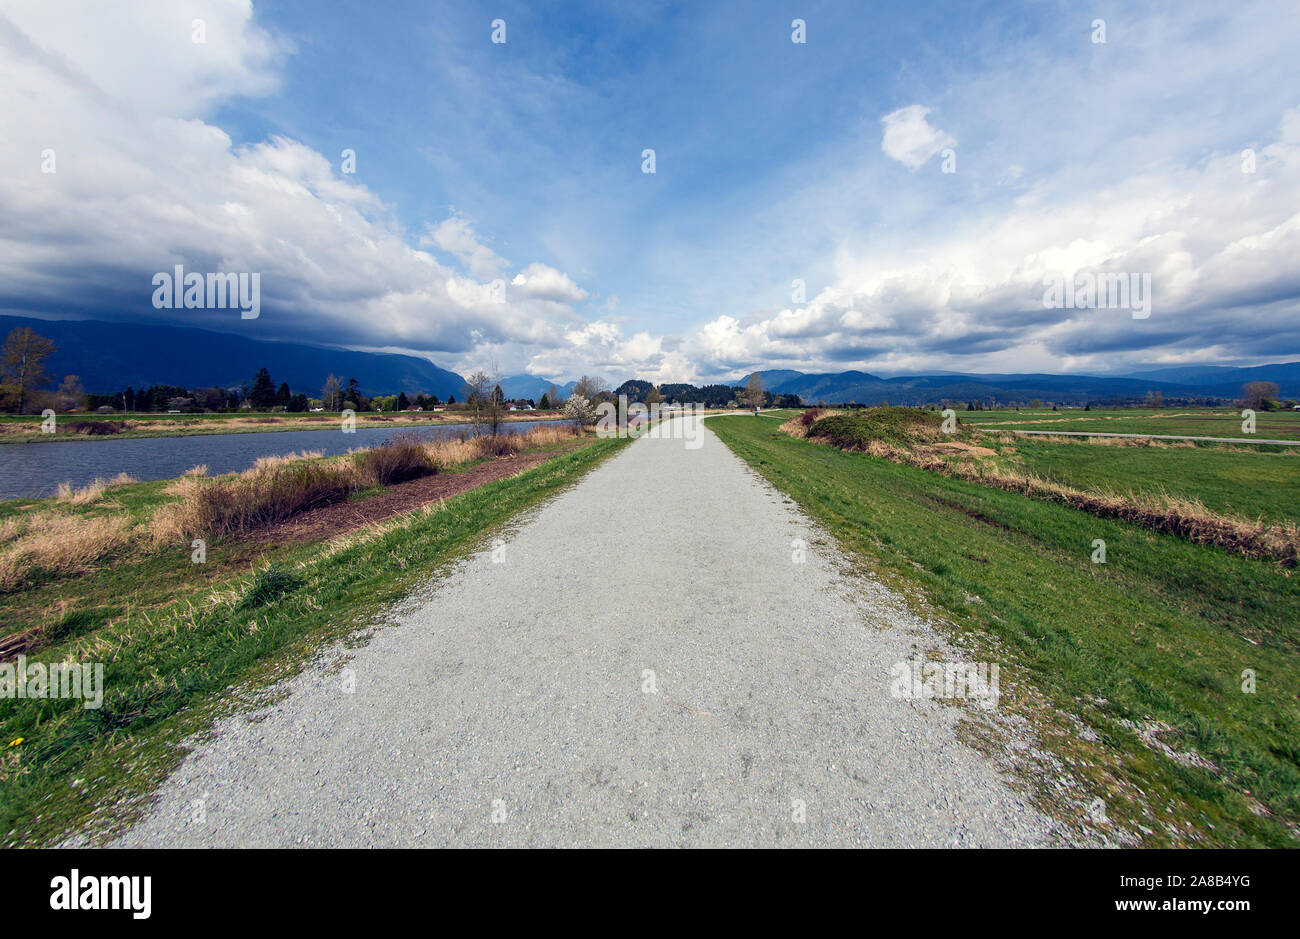 Stunning wide angle landscape with dyke and clouds as leading lines, concept of long way to go. Golden Ears Mountain, Pitt River, Pitt Meadows, Canada Stock Photo